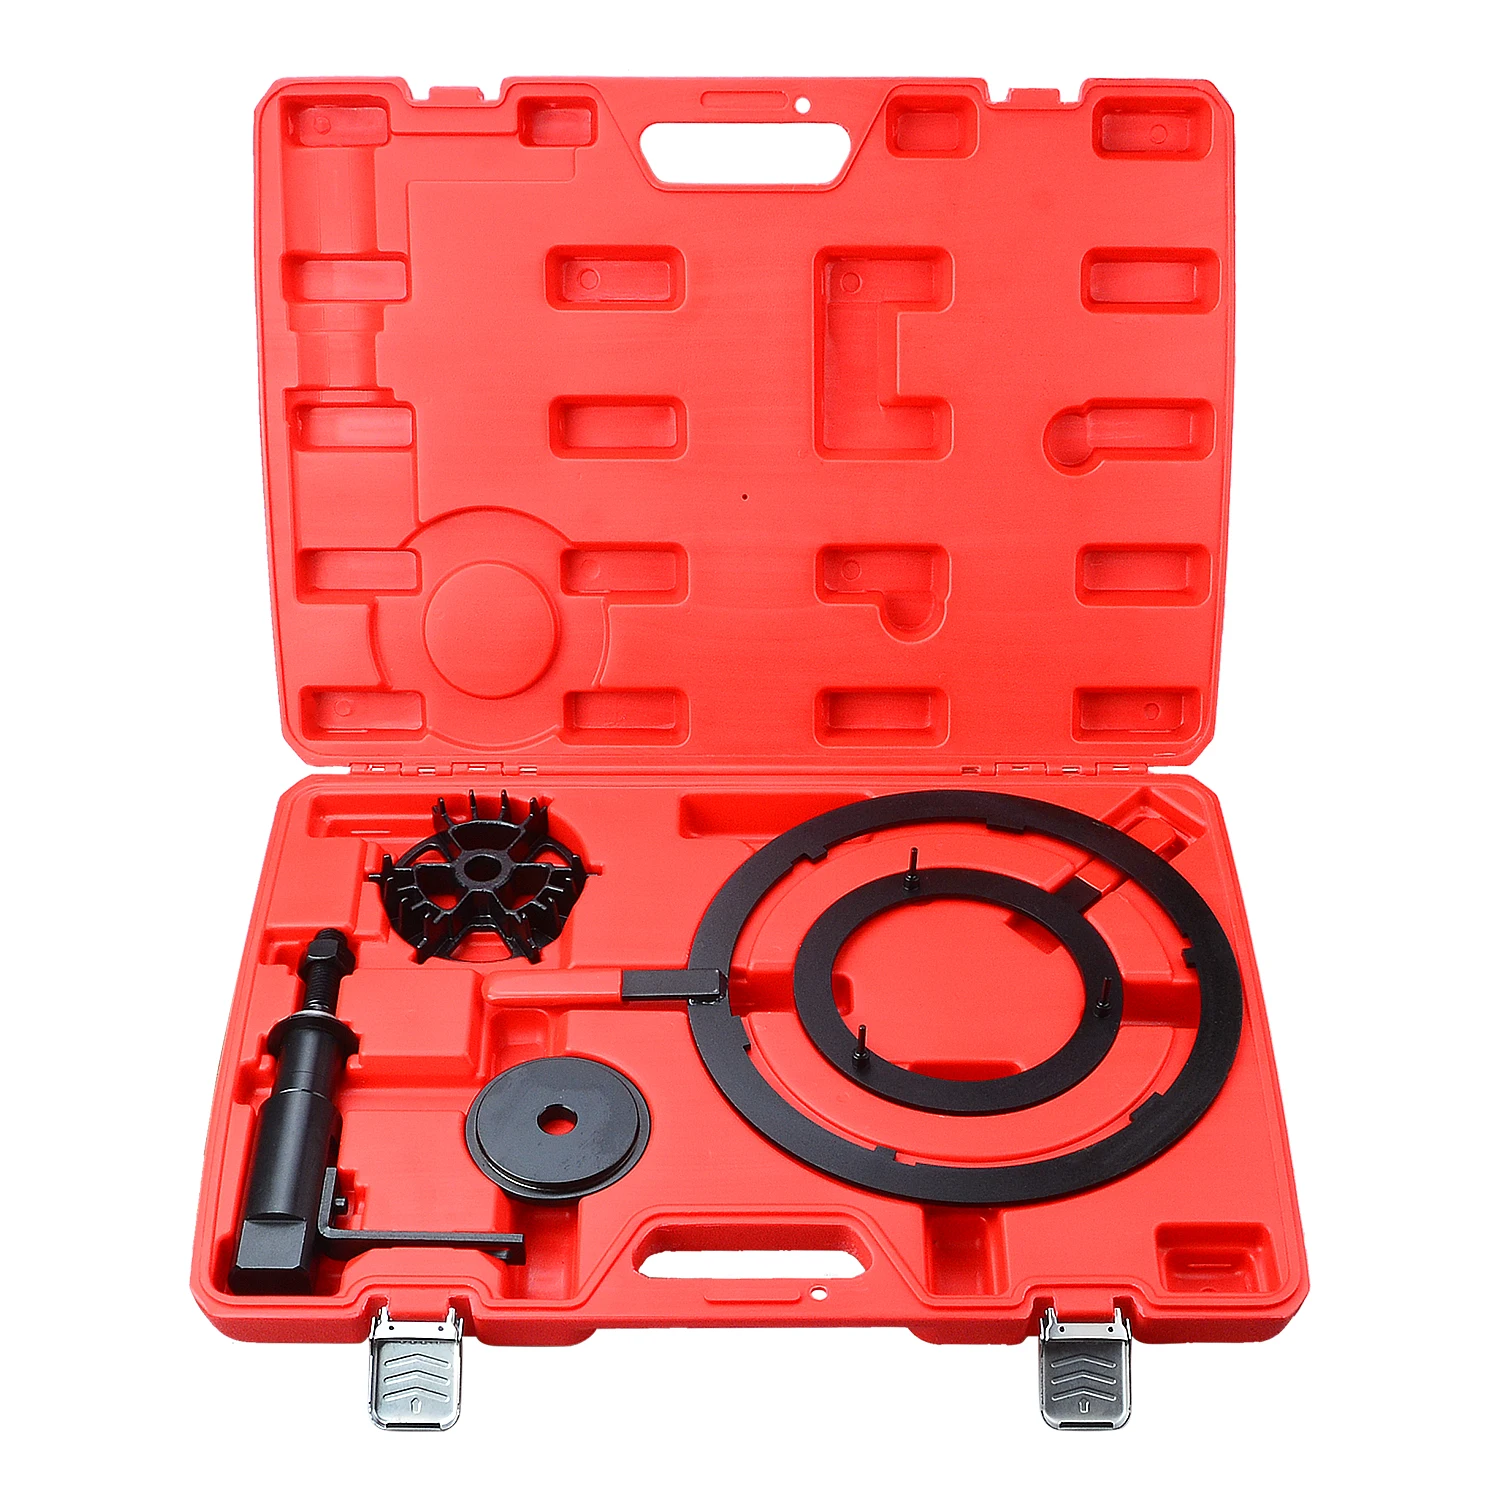 6 Speed DCT Dual Clutch Transmission Install Reset Tool Kit for Ford Fiesta Focus B Max (1600679602884)